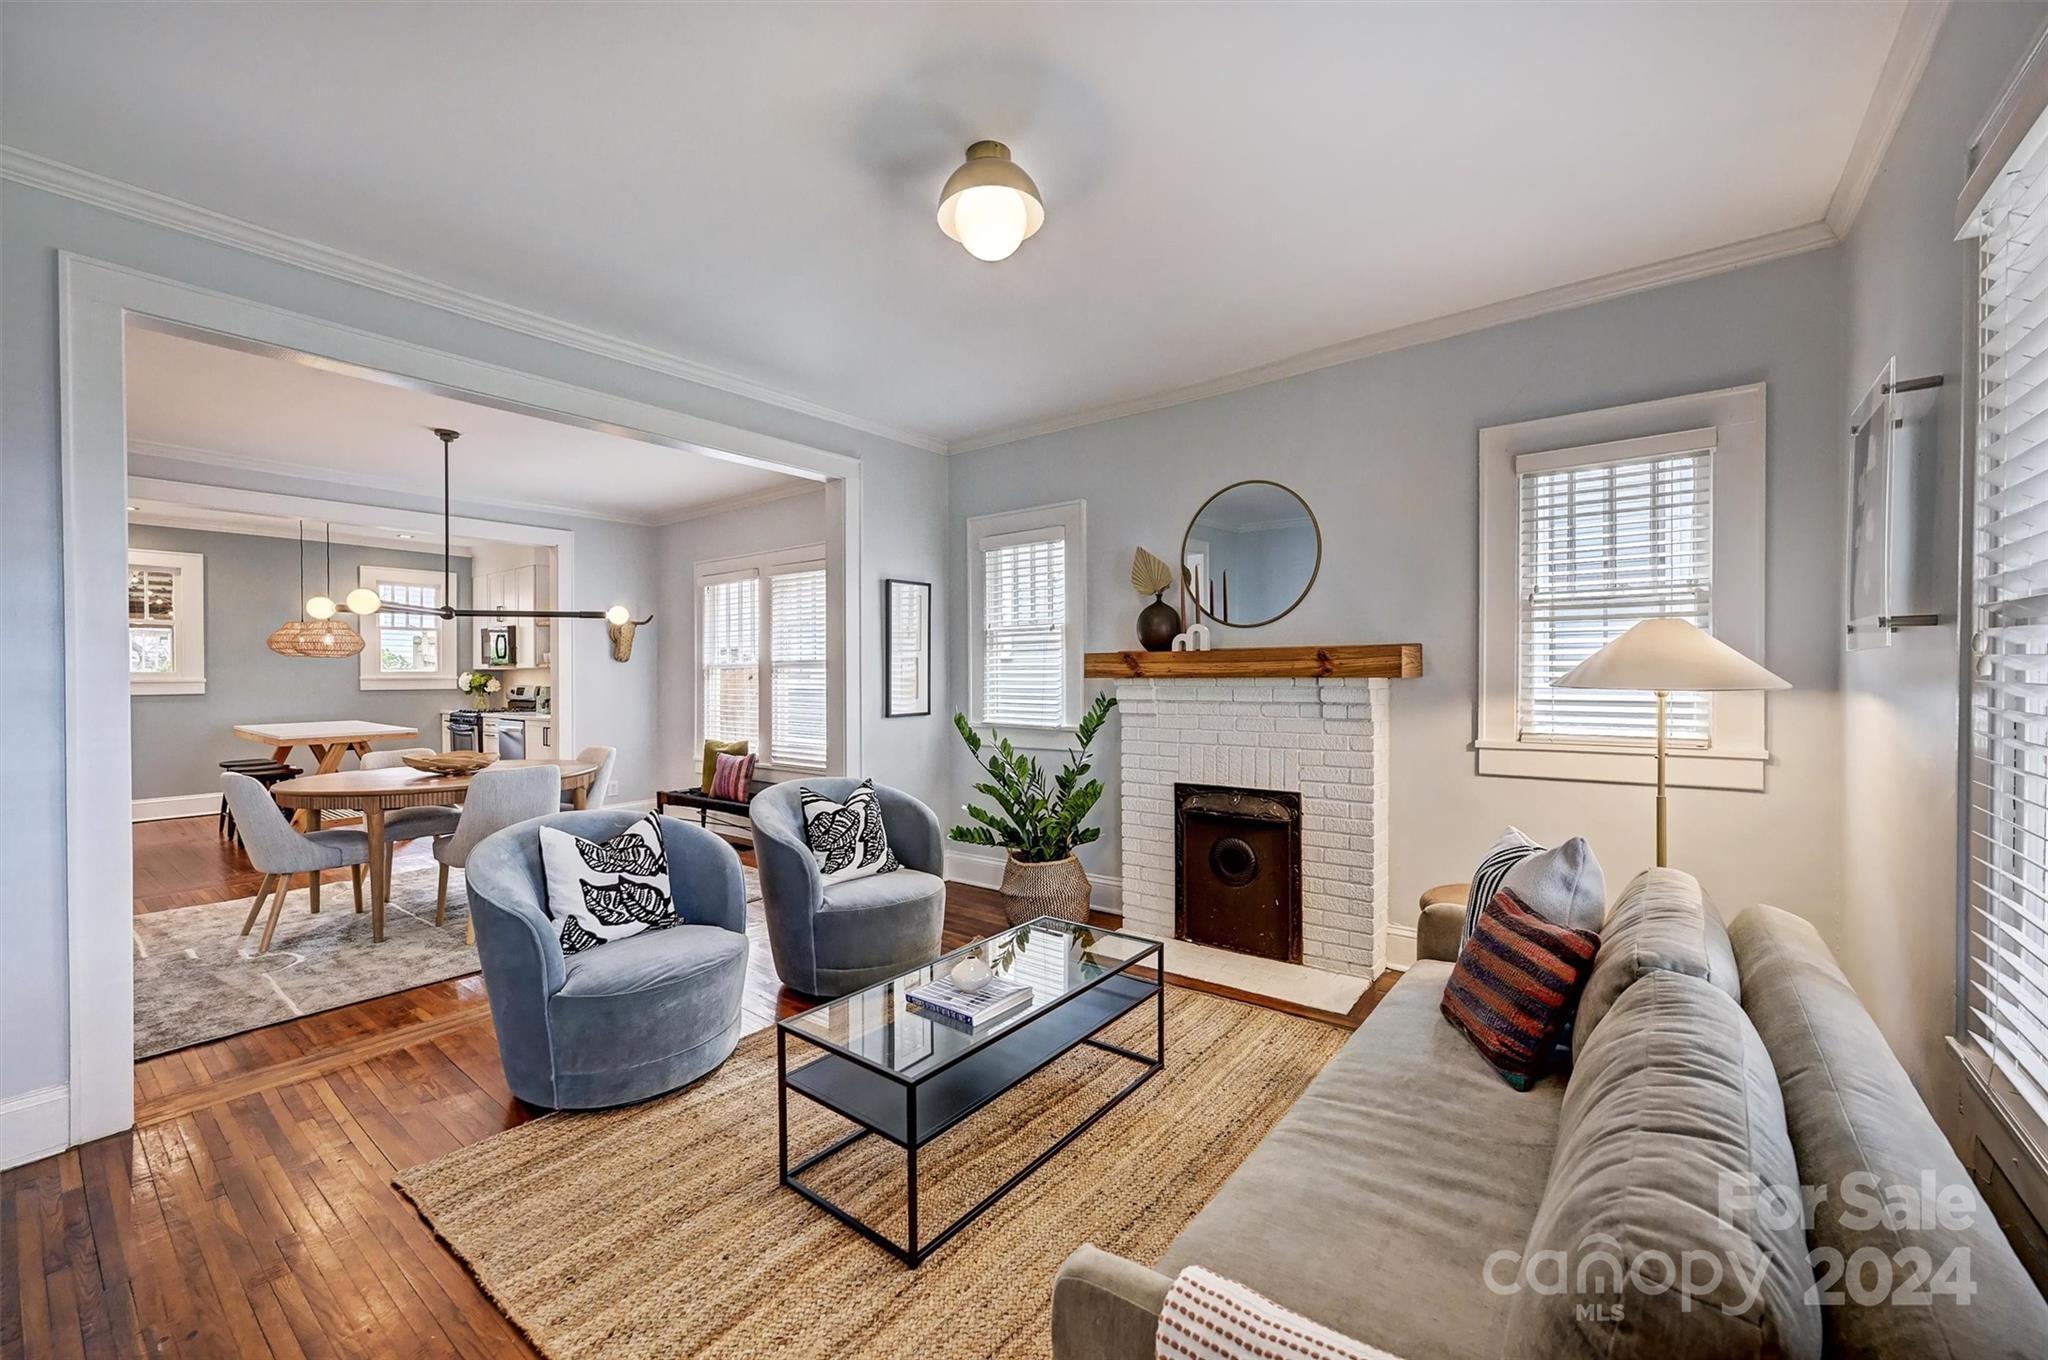 Property Image for 1204 Clement Avenue